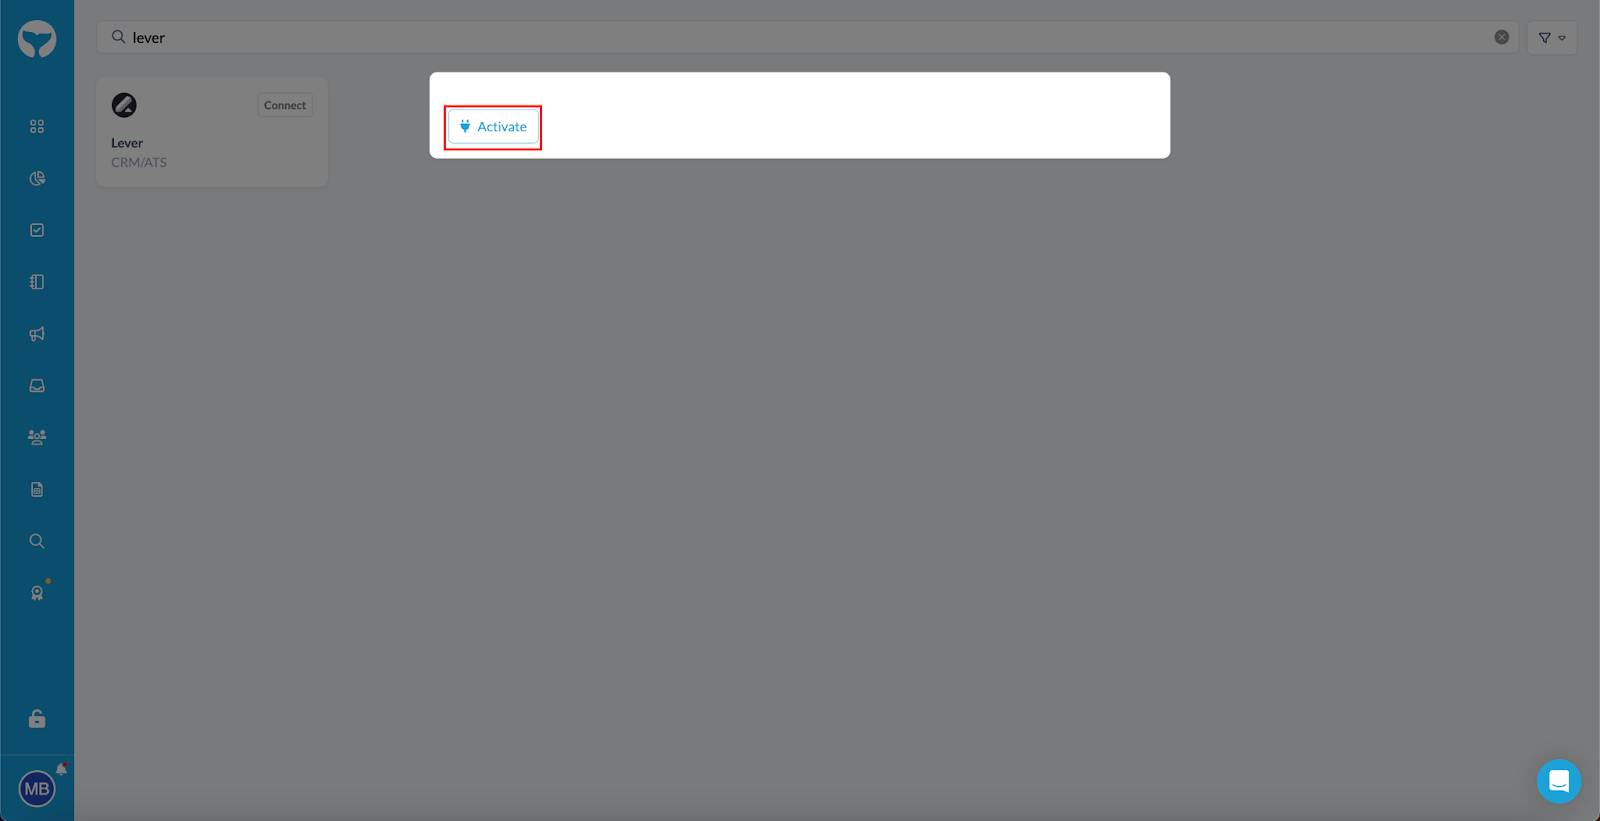 Activate button outlined after selecting Lever on SourceWhale integration page